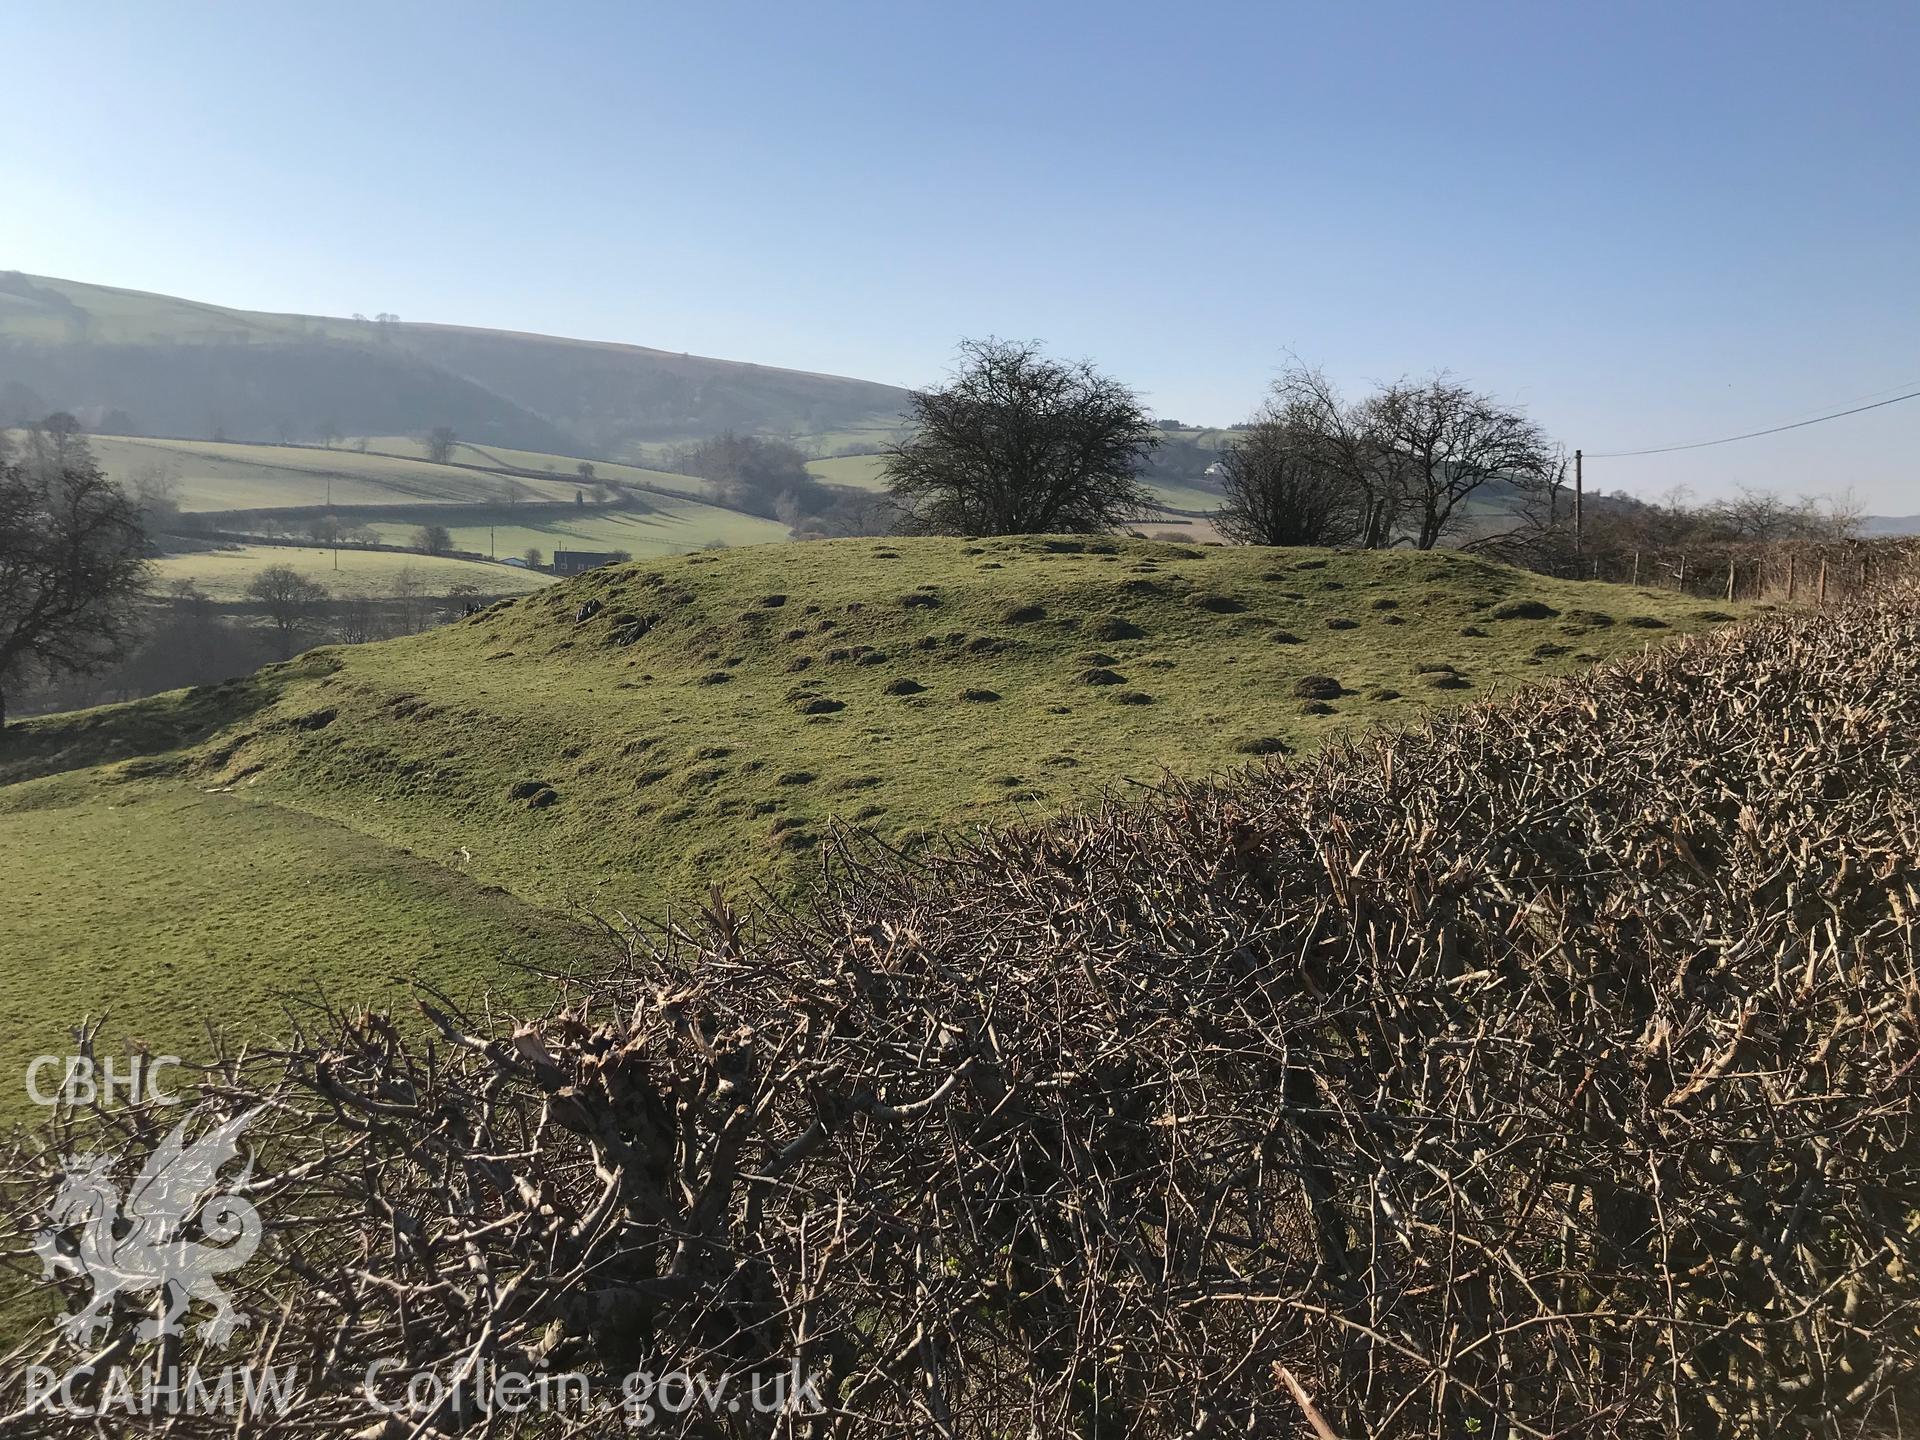 Digital colour photograph of square enclosure and mound at Vron, Glascwm, north east of Builth Wells, taken by Paul R. Davis on 26th February 2019.